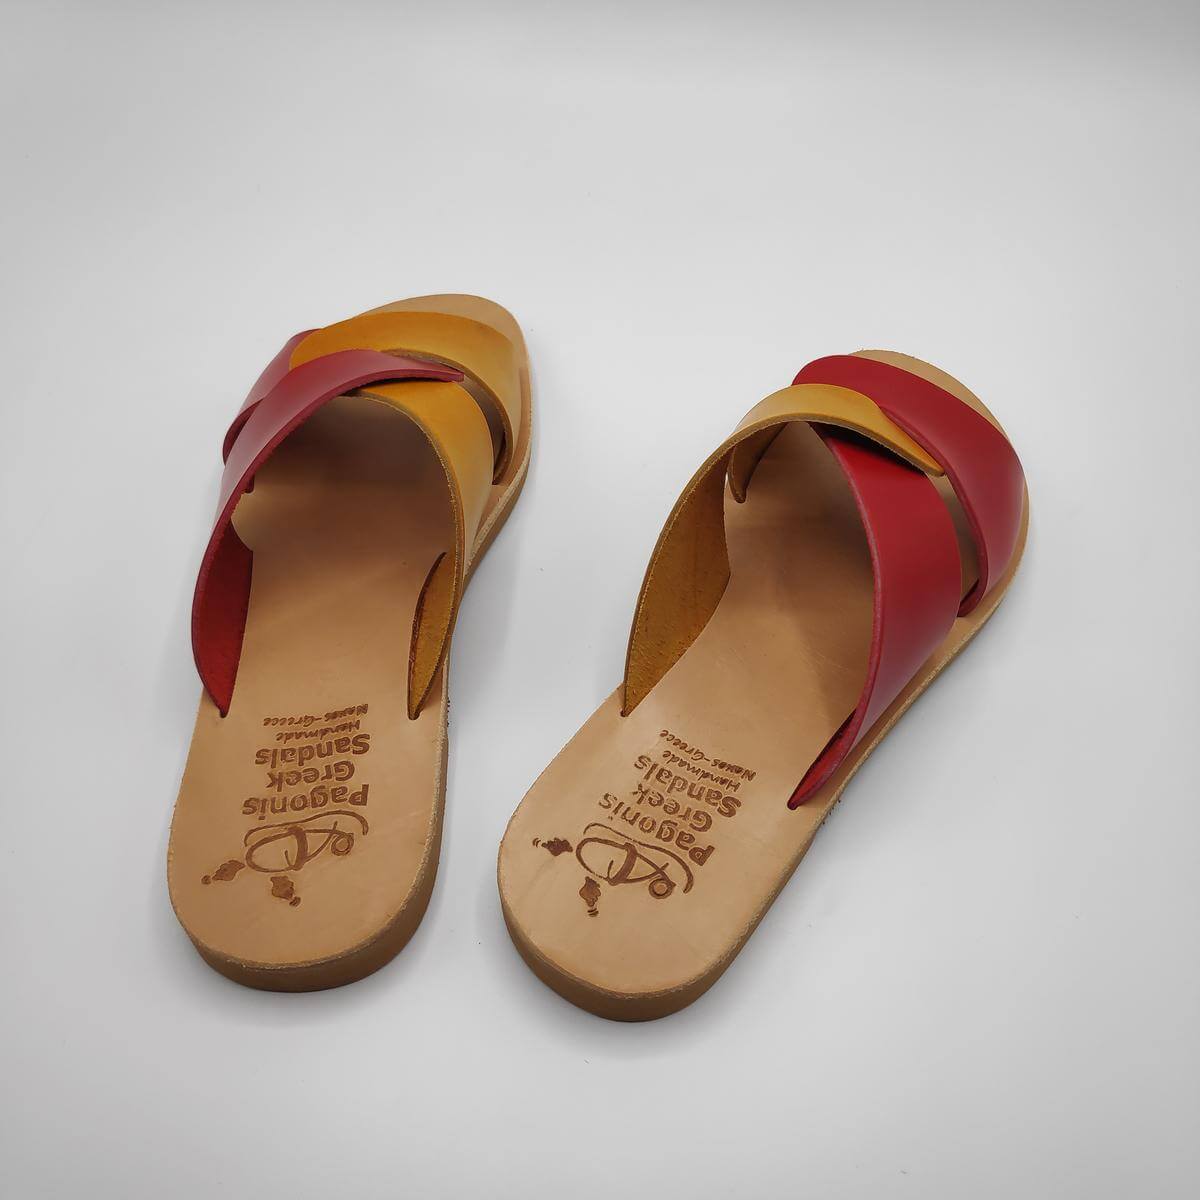 desmos leather sandal yellow red pagonis